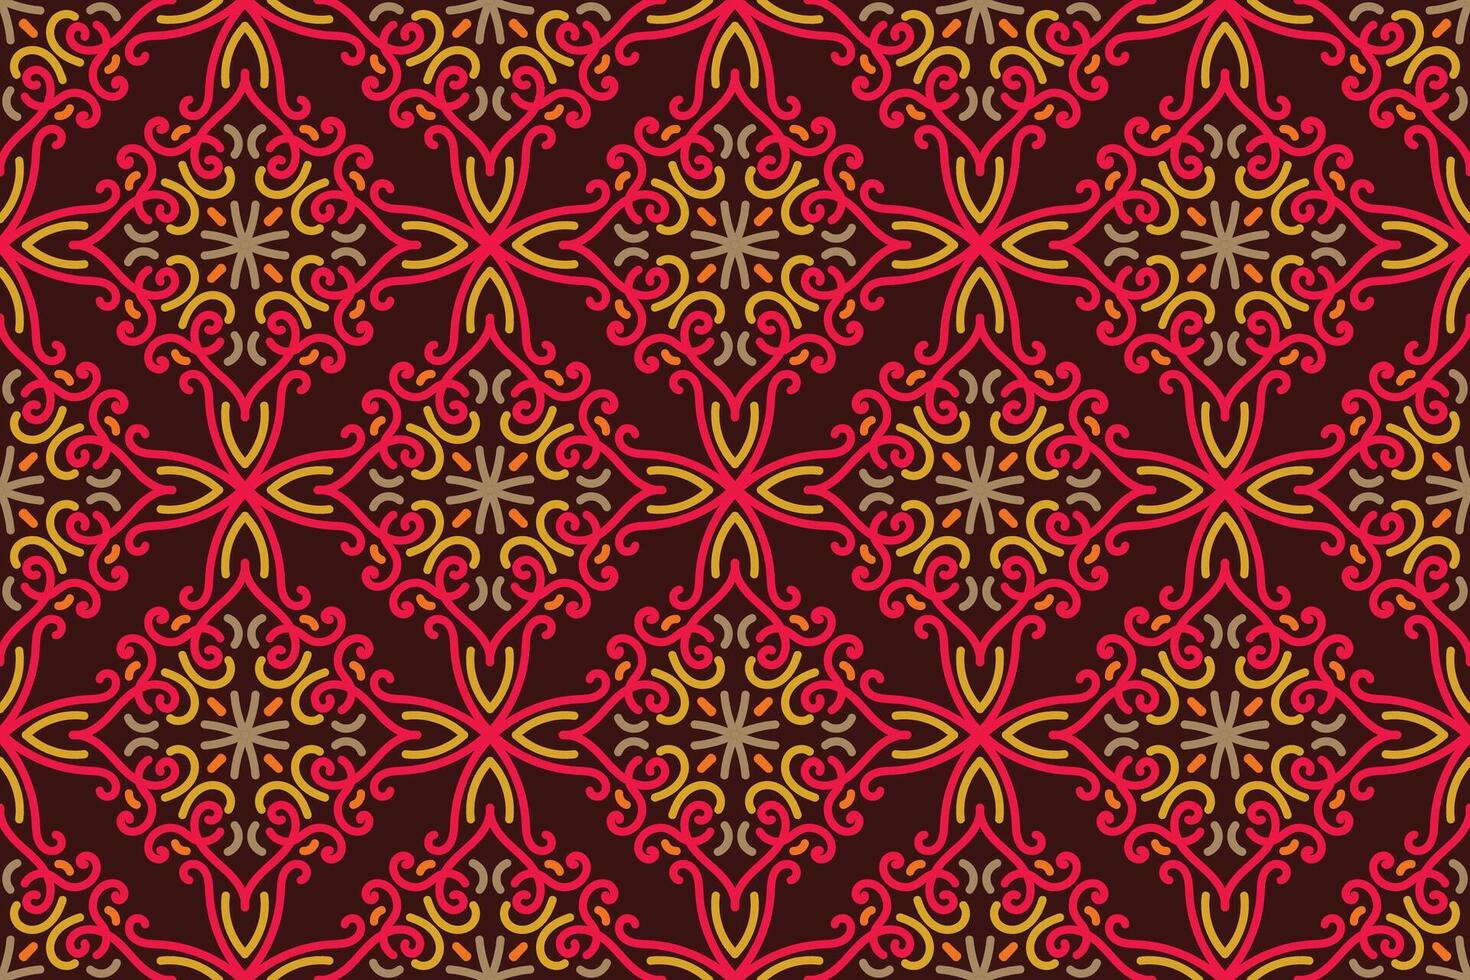 Seamless tribal texture or pattern vector